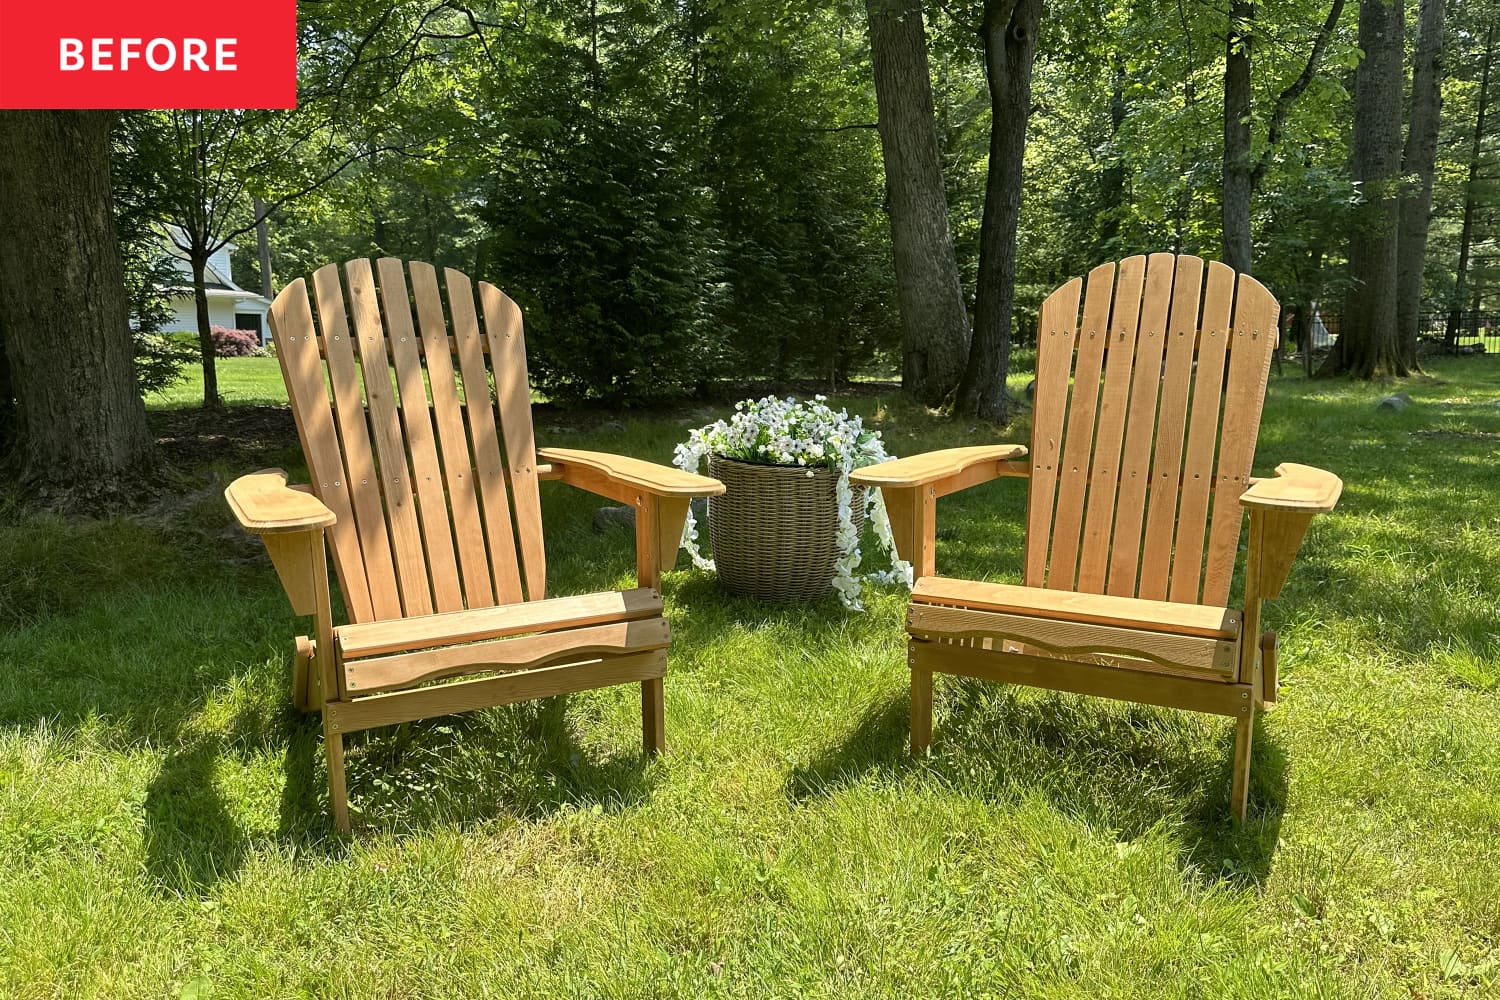 SPONSORED POST: An Easy DIY Takes These Adirondack Chairs from “Grimy and Sad” to Polished and Timeless